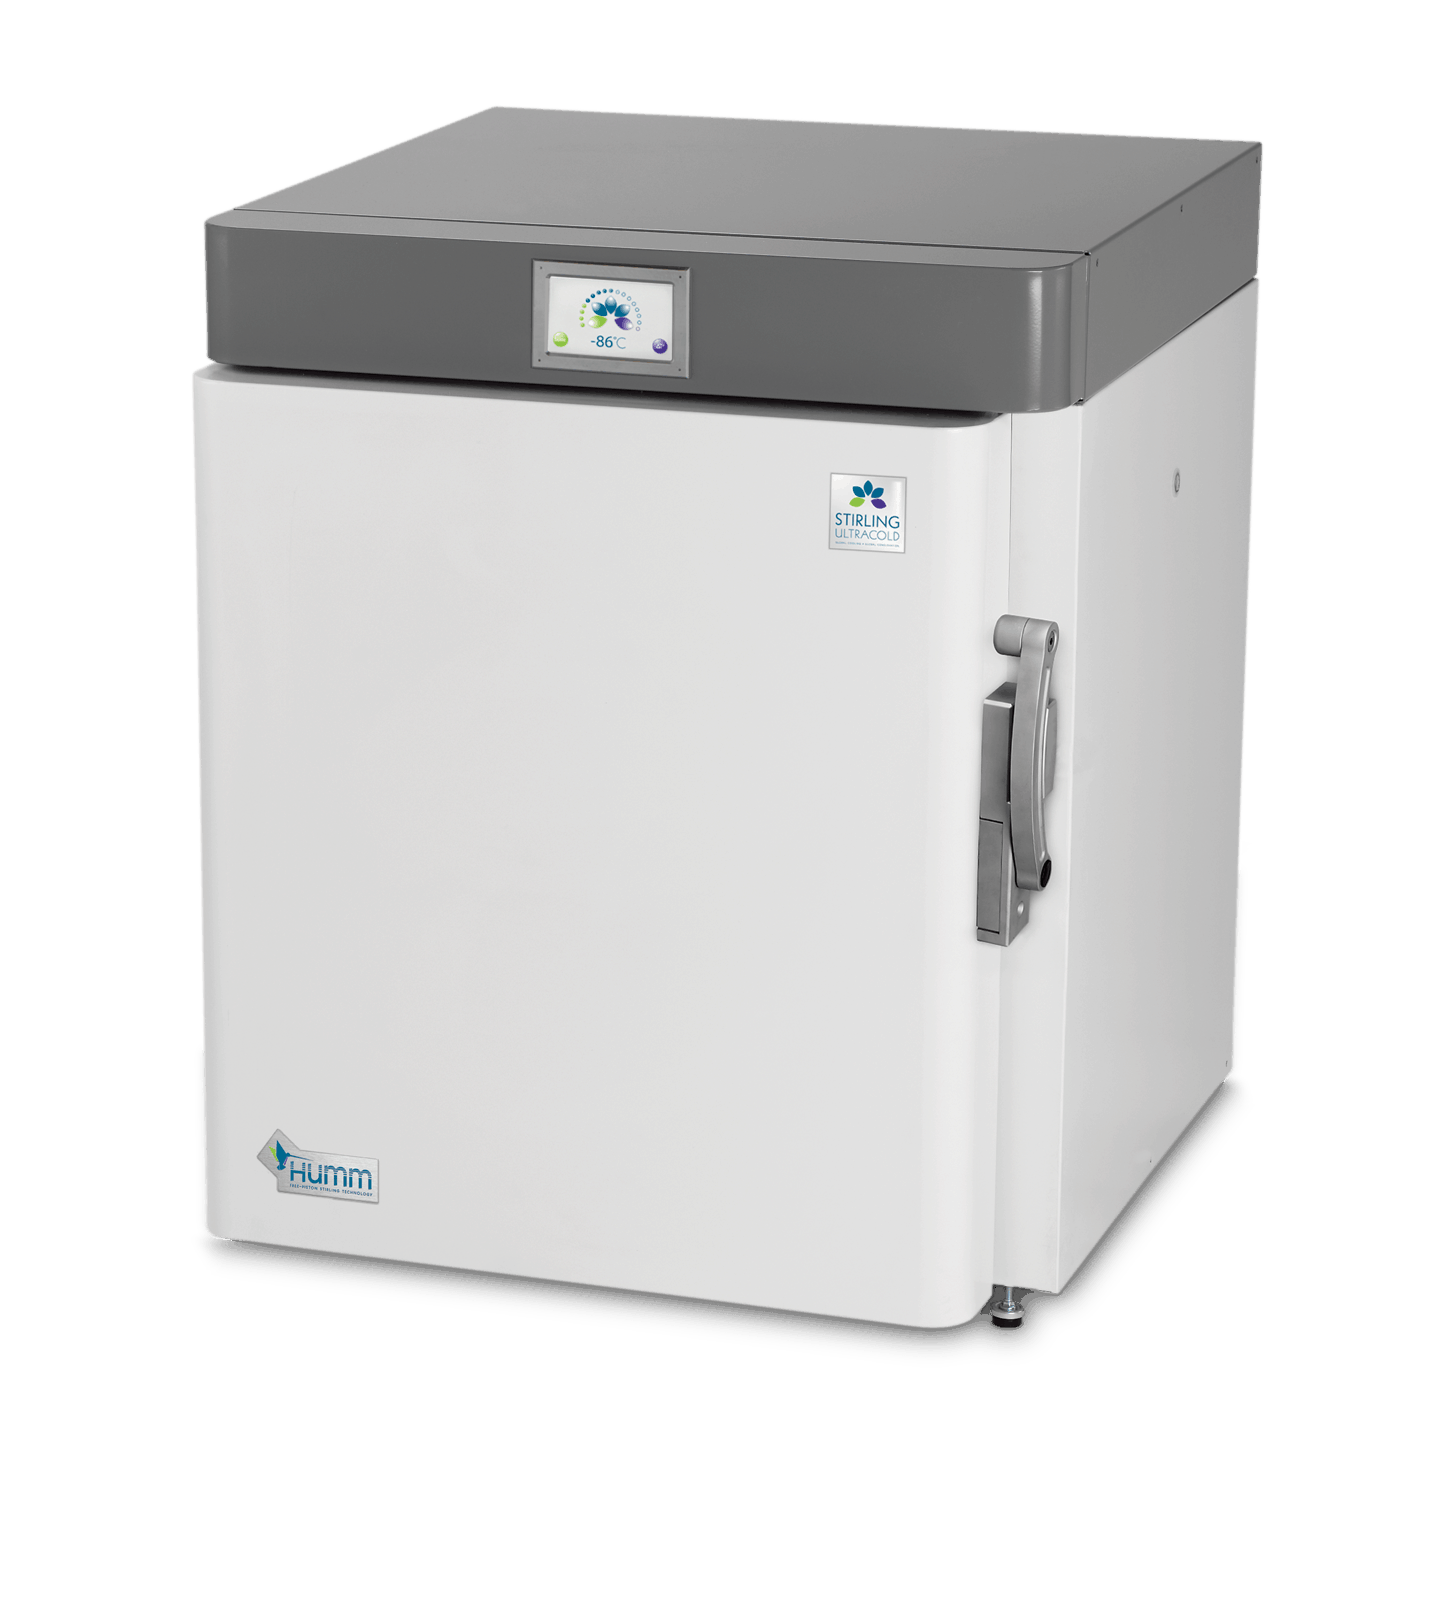 Stirling Ultracold Compact Ultra-Low Freezer SU105UE